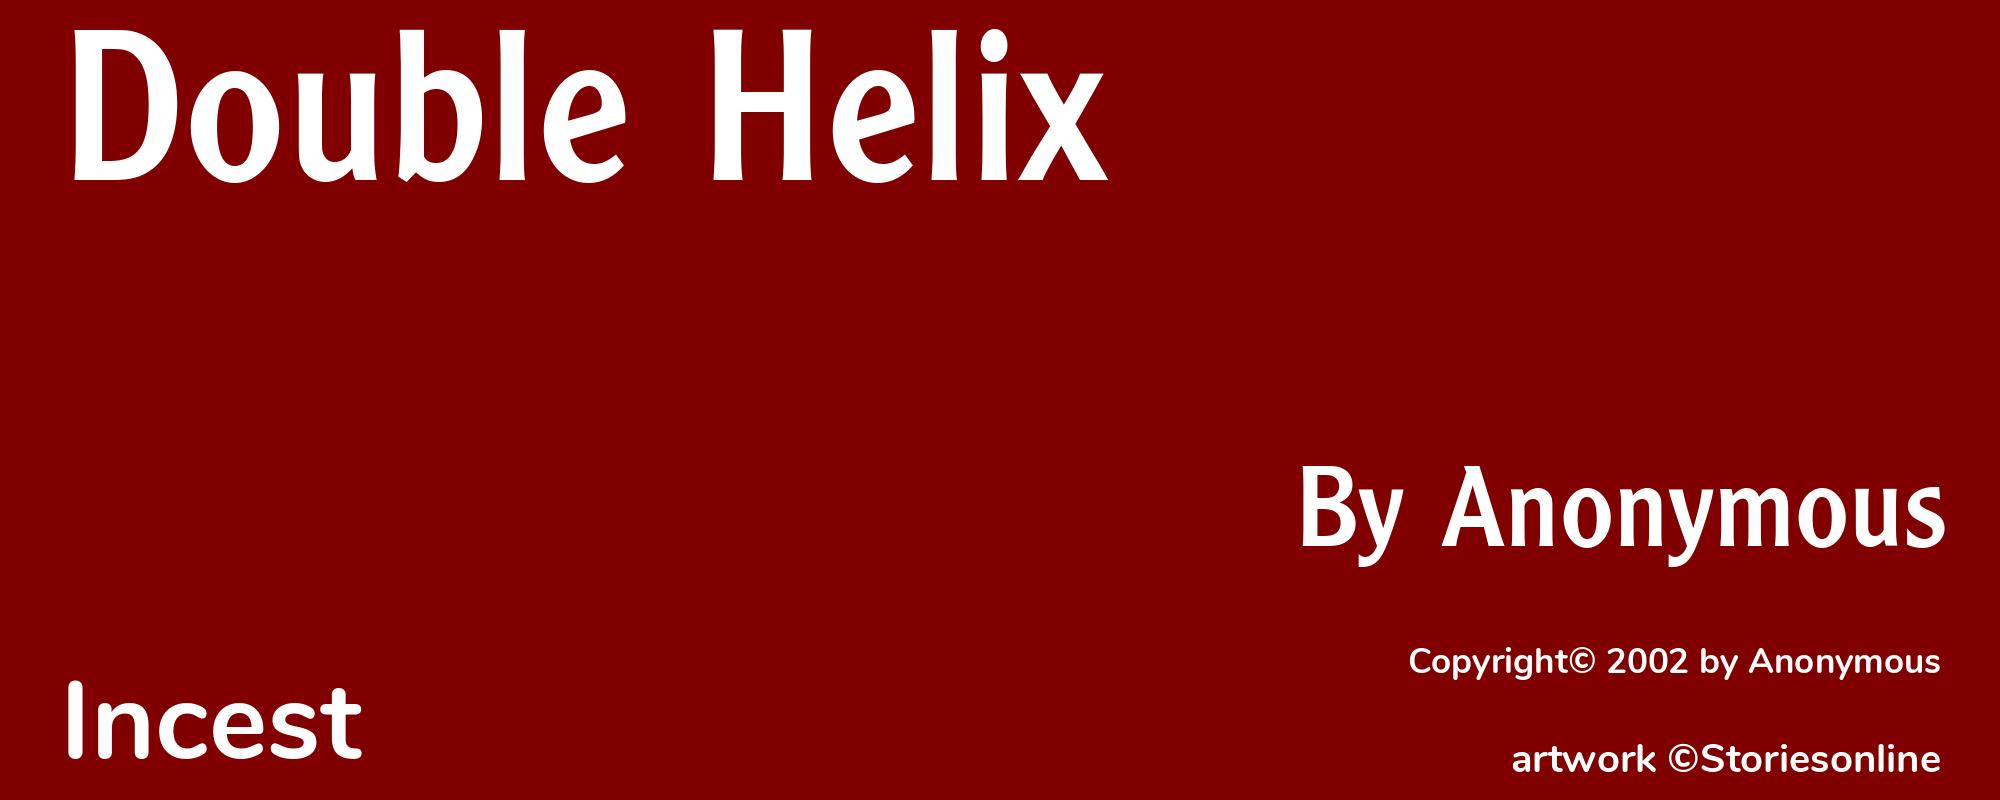 Double Helix - Cover